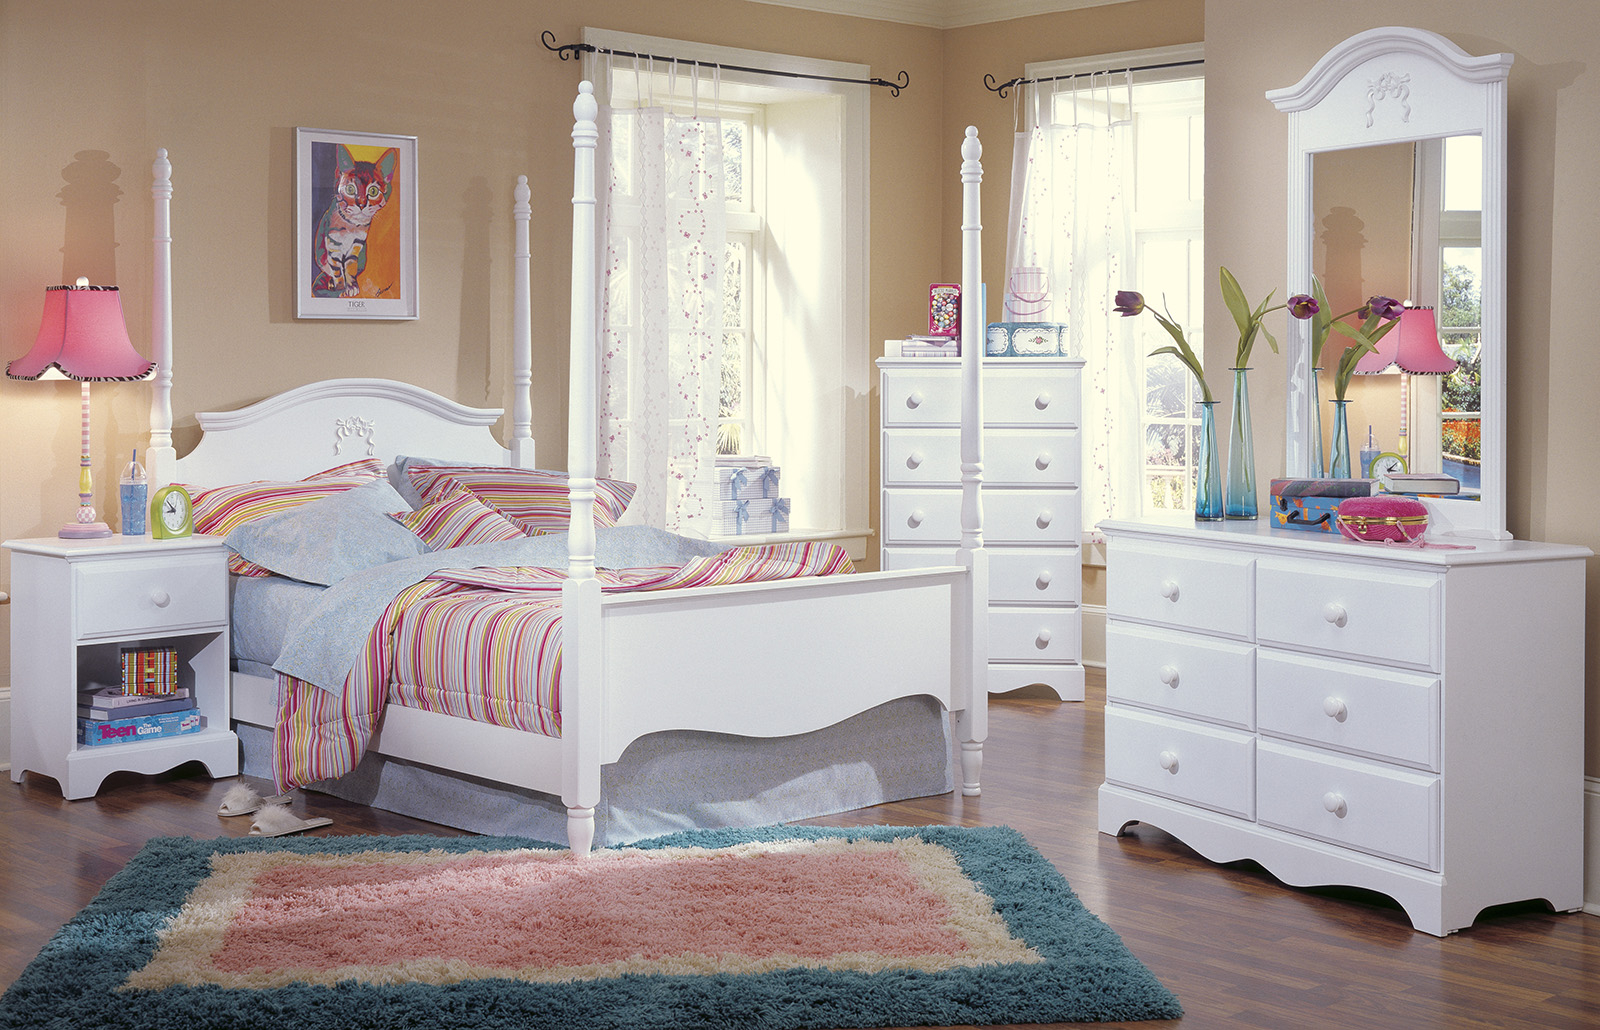 Carolina Furniture Cottage 4 Piece Princess Bedroom Set In White intended for proportions 1600 X 1030